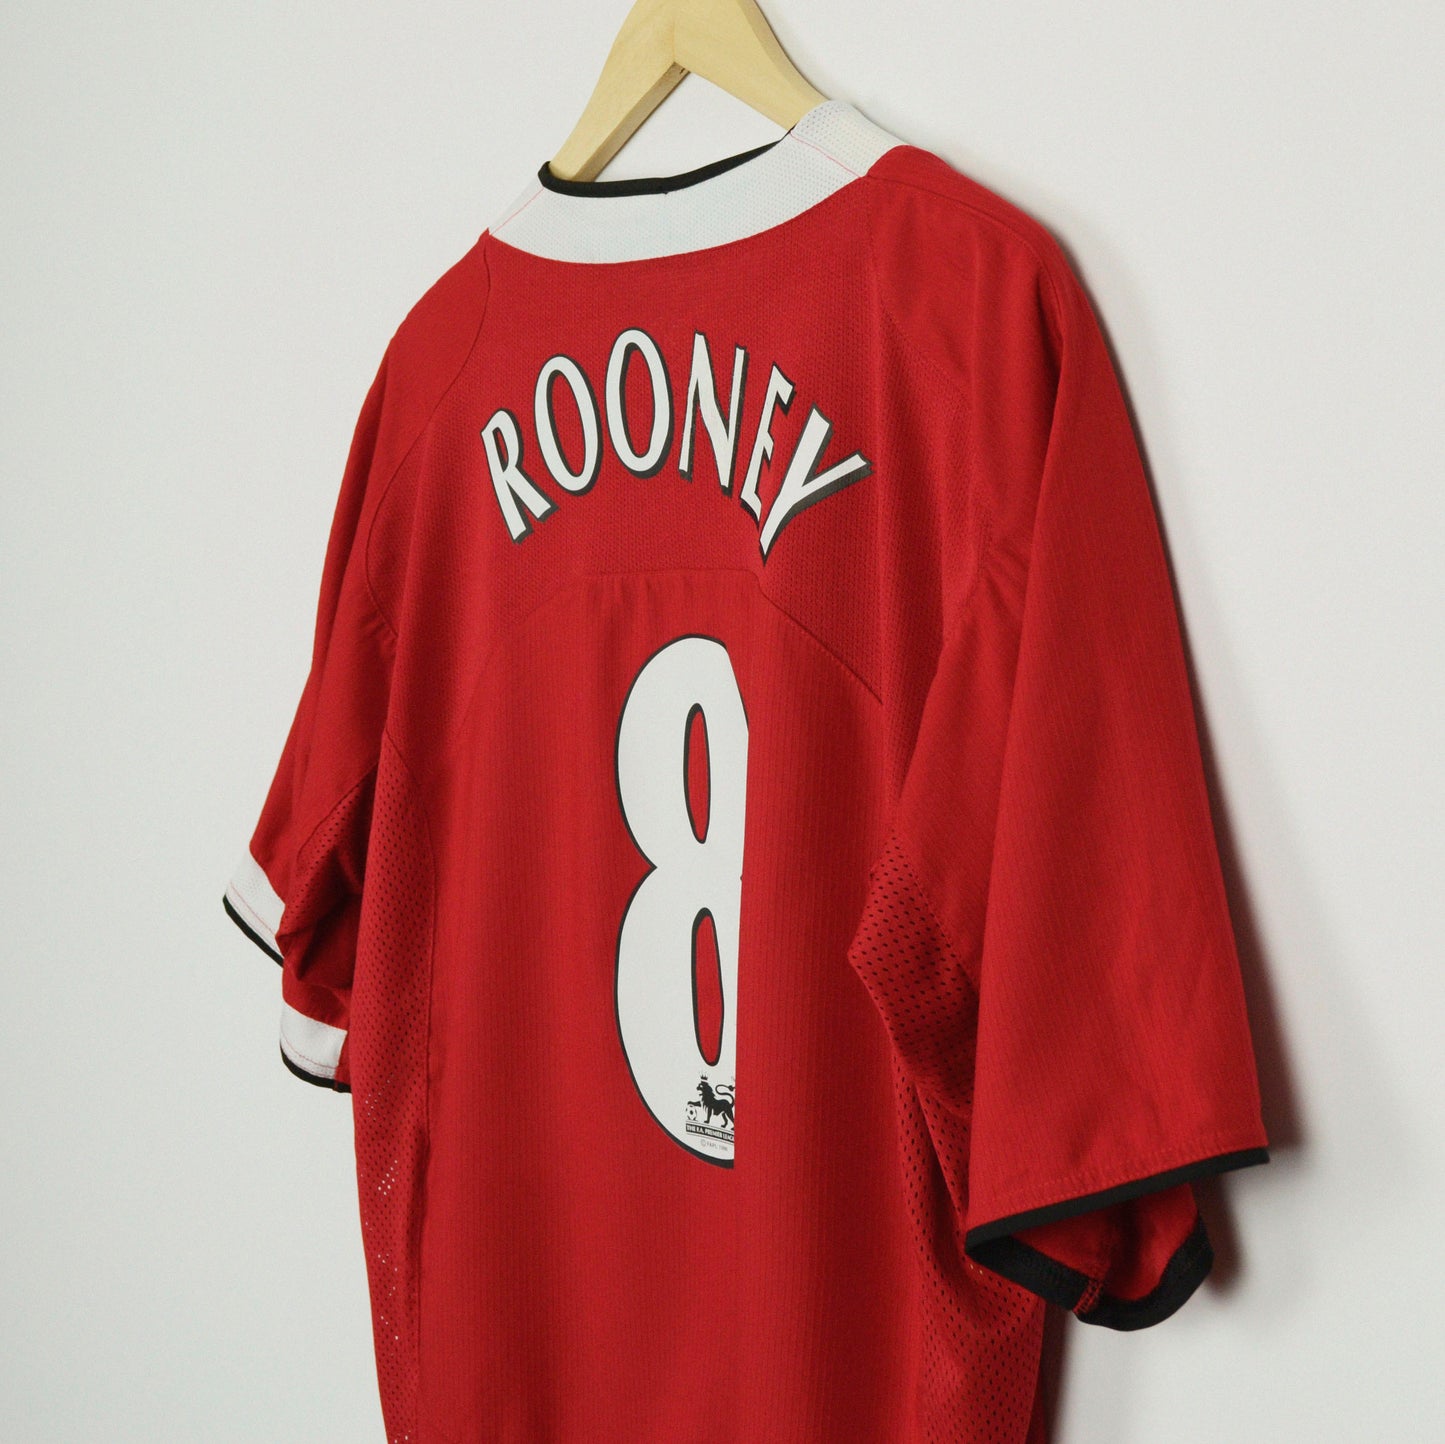 2004-06 Nike Manchester United Home Shirt 'Rooney 8' XL